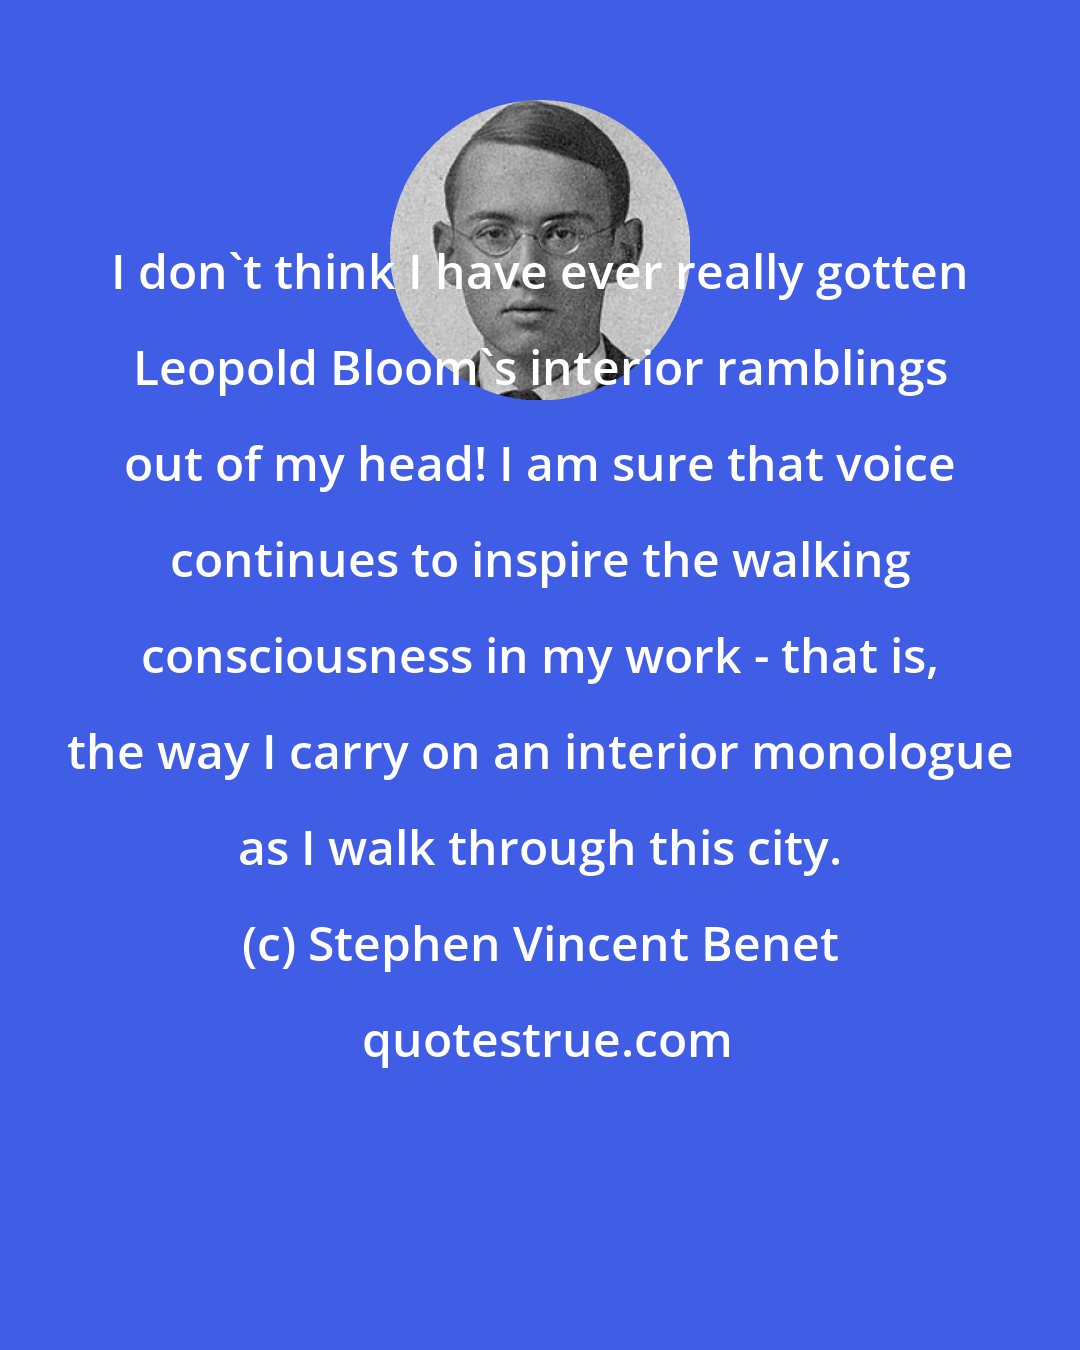 Stephen Vincent Benet: I don't think I have ever really gotten Leopold Bloom's interior ramblings out of my head! I am sure that voice continues to inspire the walking consciousness in my work - that is, the way I carry on an interior monologue as I walk through this city.